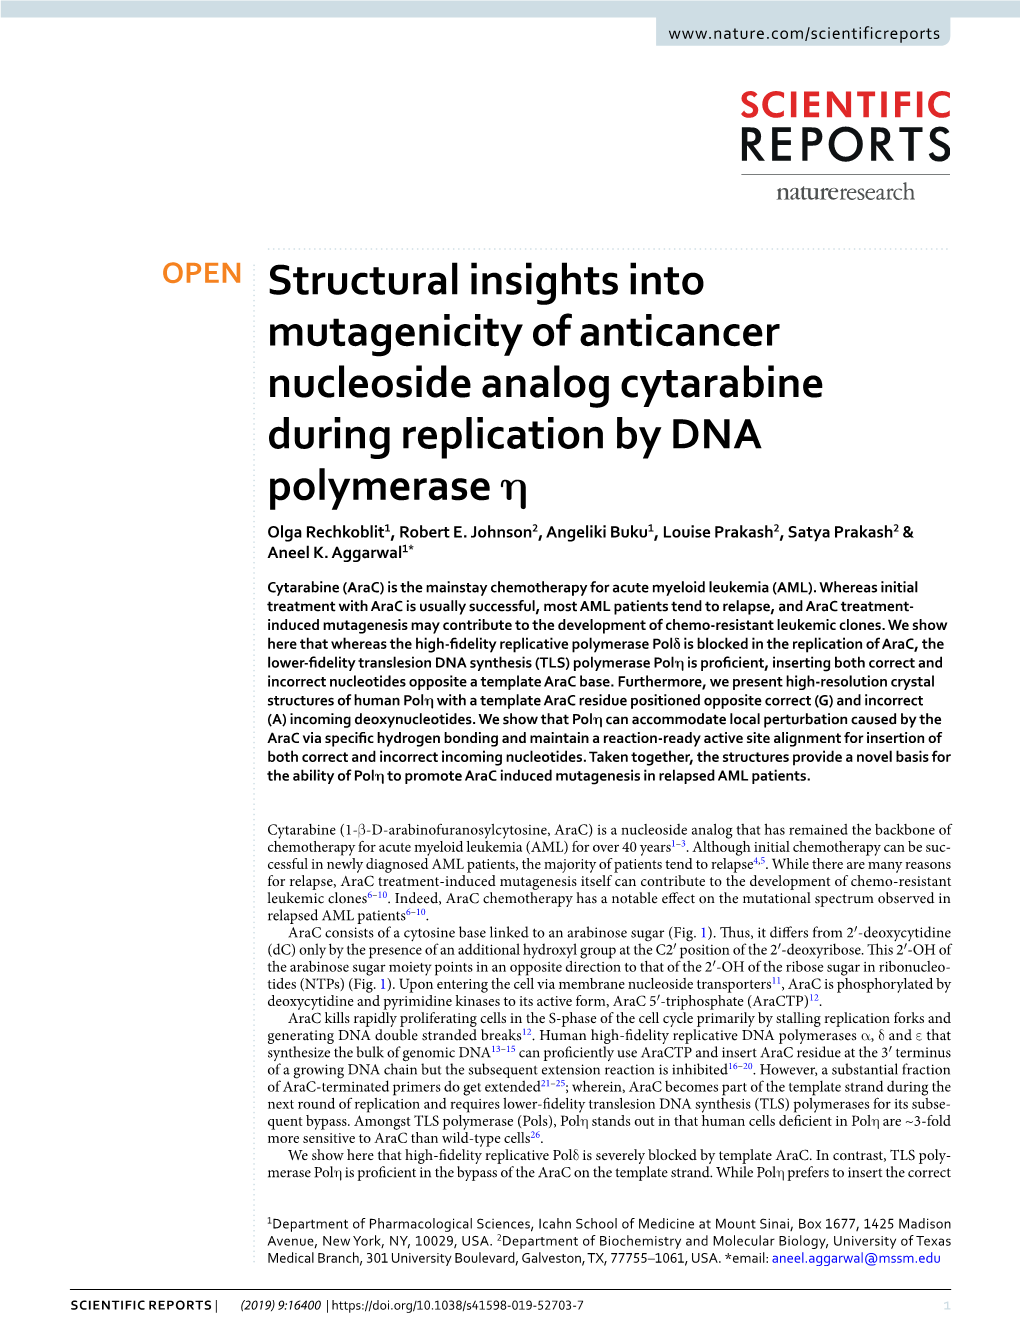 Structural Insights Into Mutagenicity of Anticancer Nucleoside Analog Cytarabine During Replication by DNA Polymerase Η Olga Rechkoblit1, Robert E